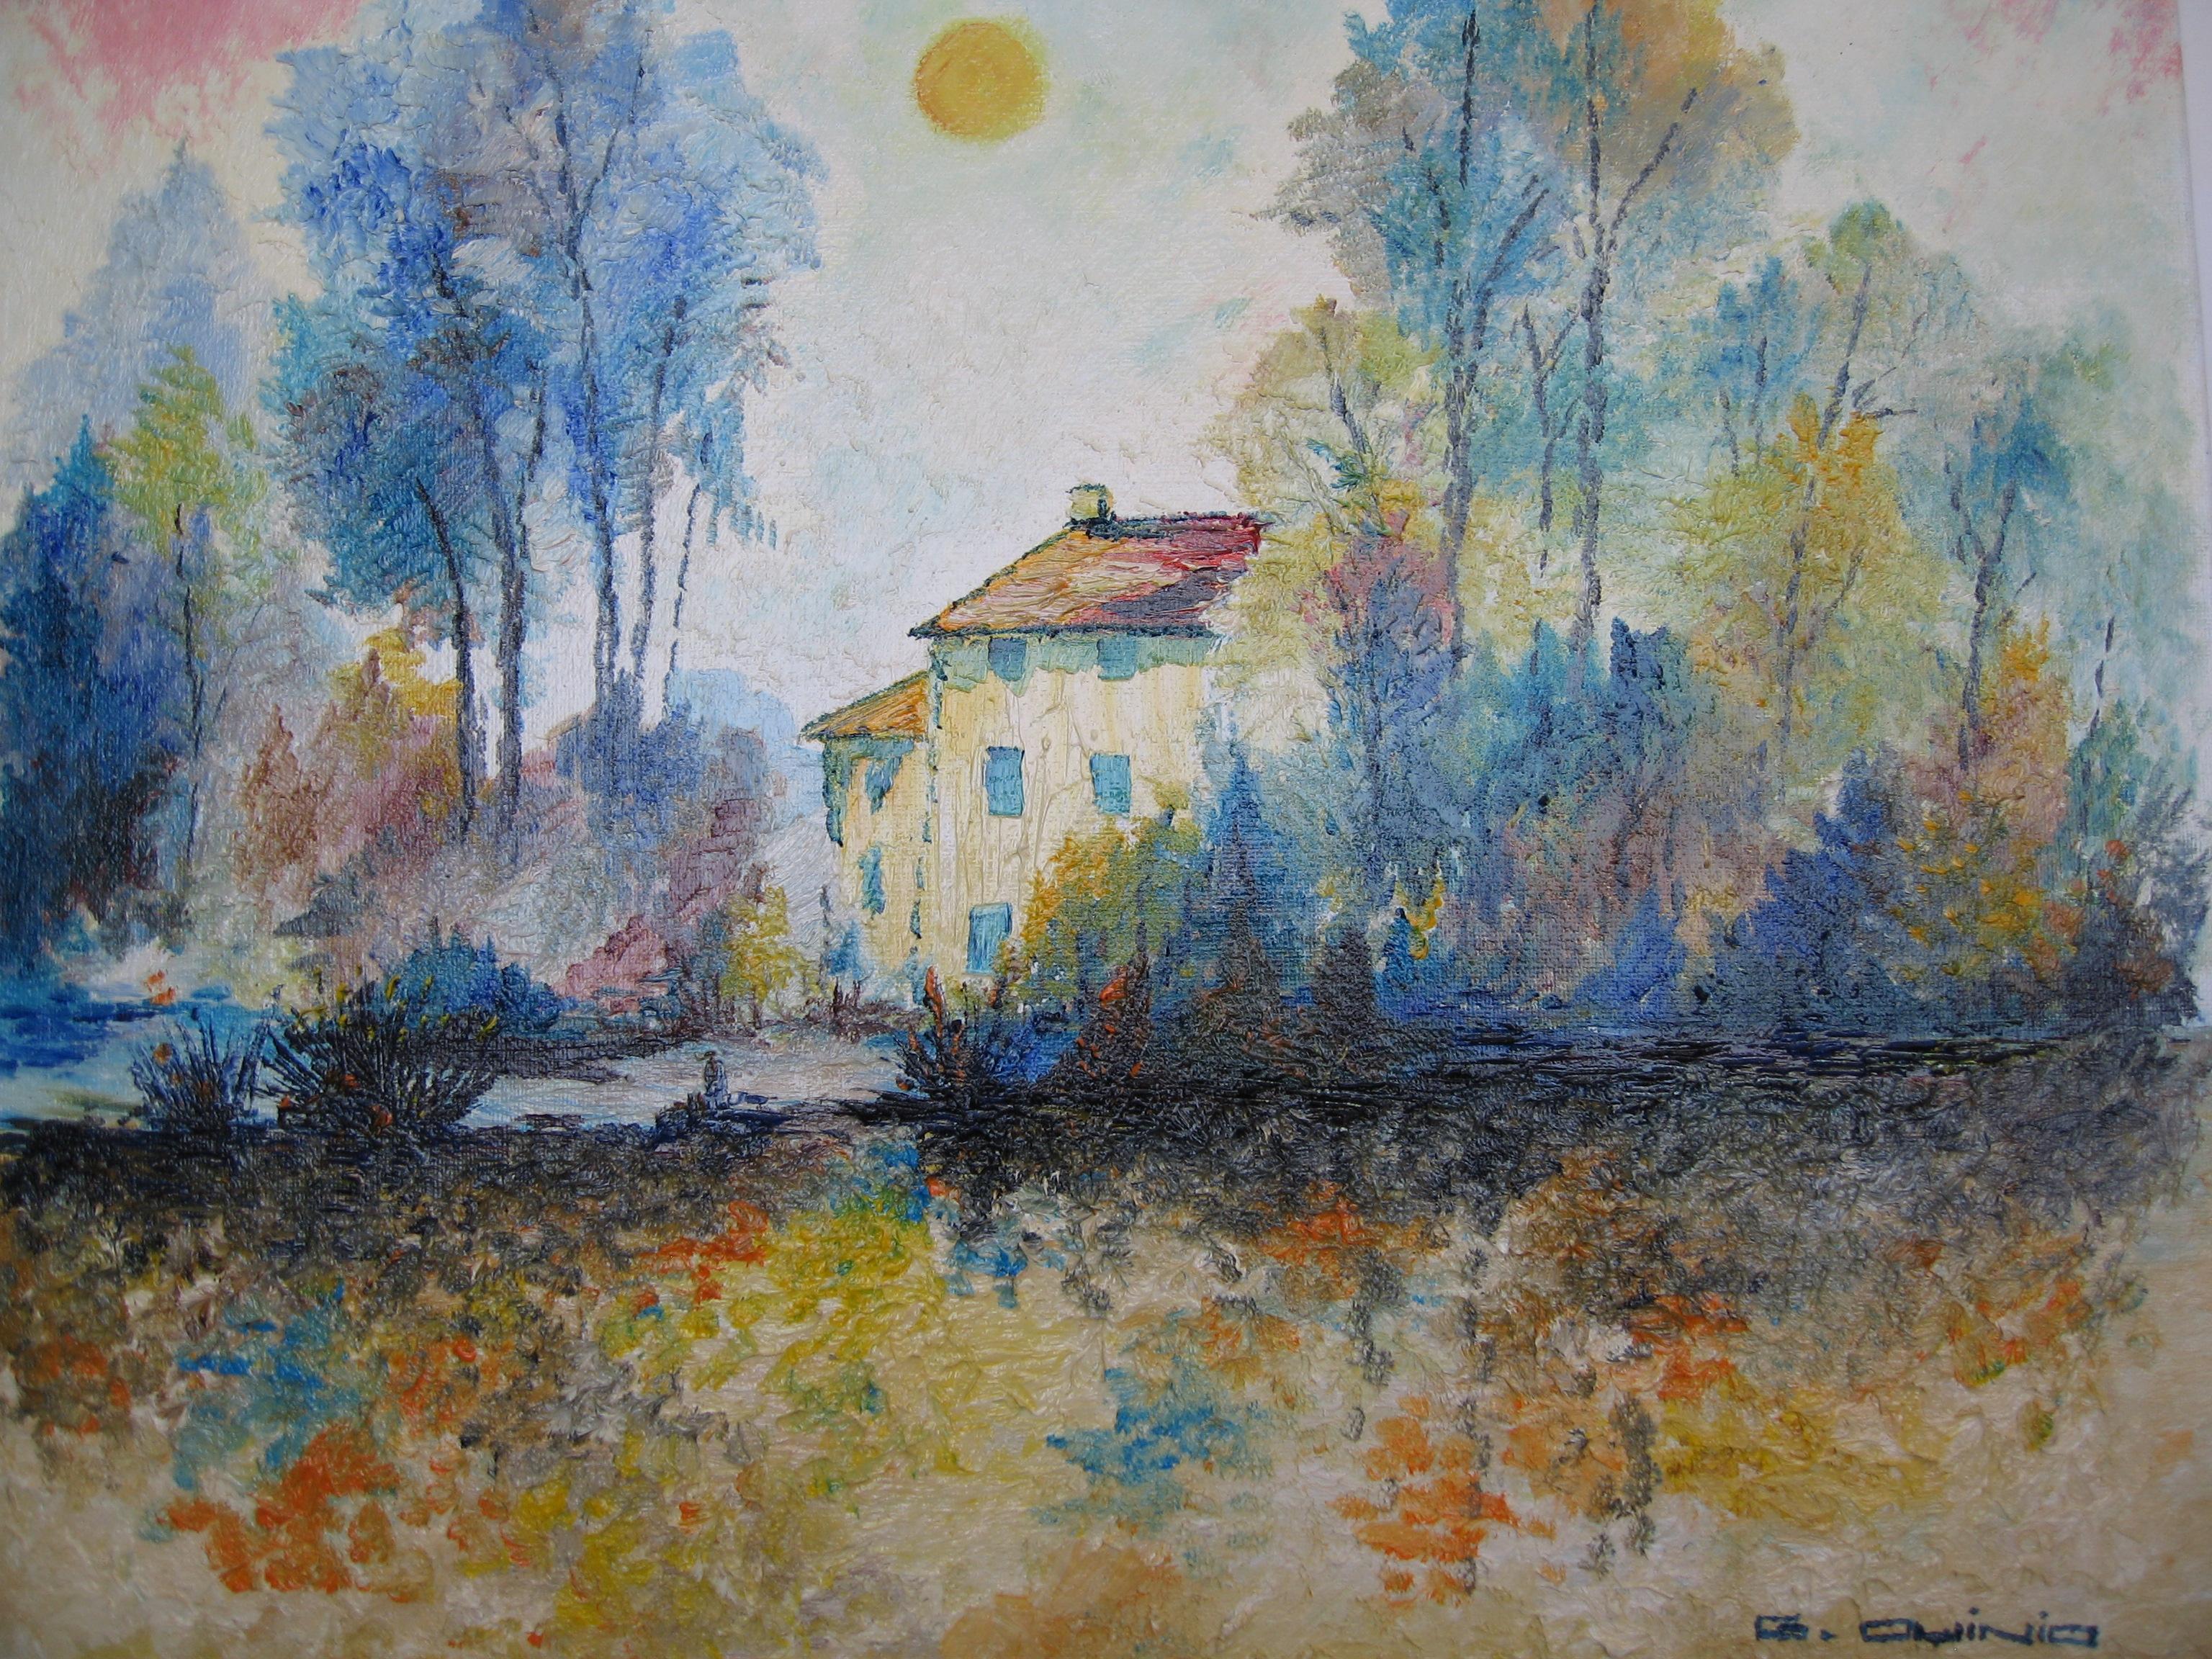 French Modern Art by Georges R. Quinio - Le Moulin de Janot 